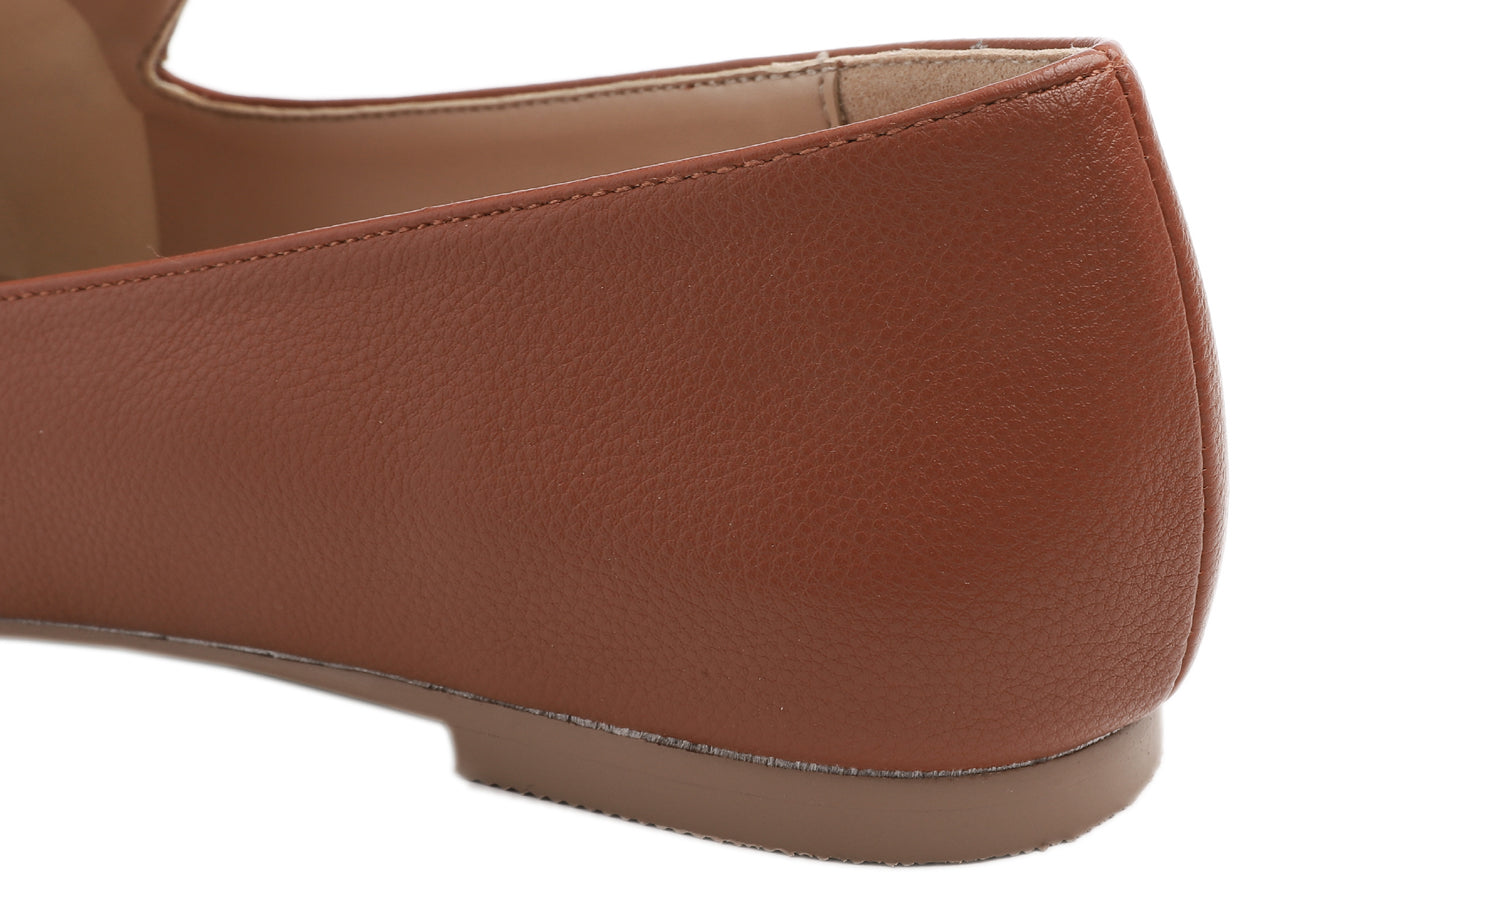 Feversole Women's Loafer Flat Pointed Fashion Slip On Comfort Driving Office Shoes Camel PU Leather